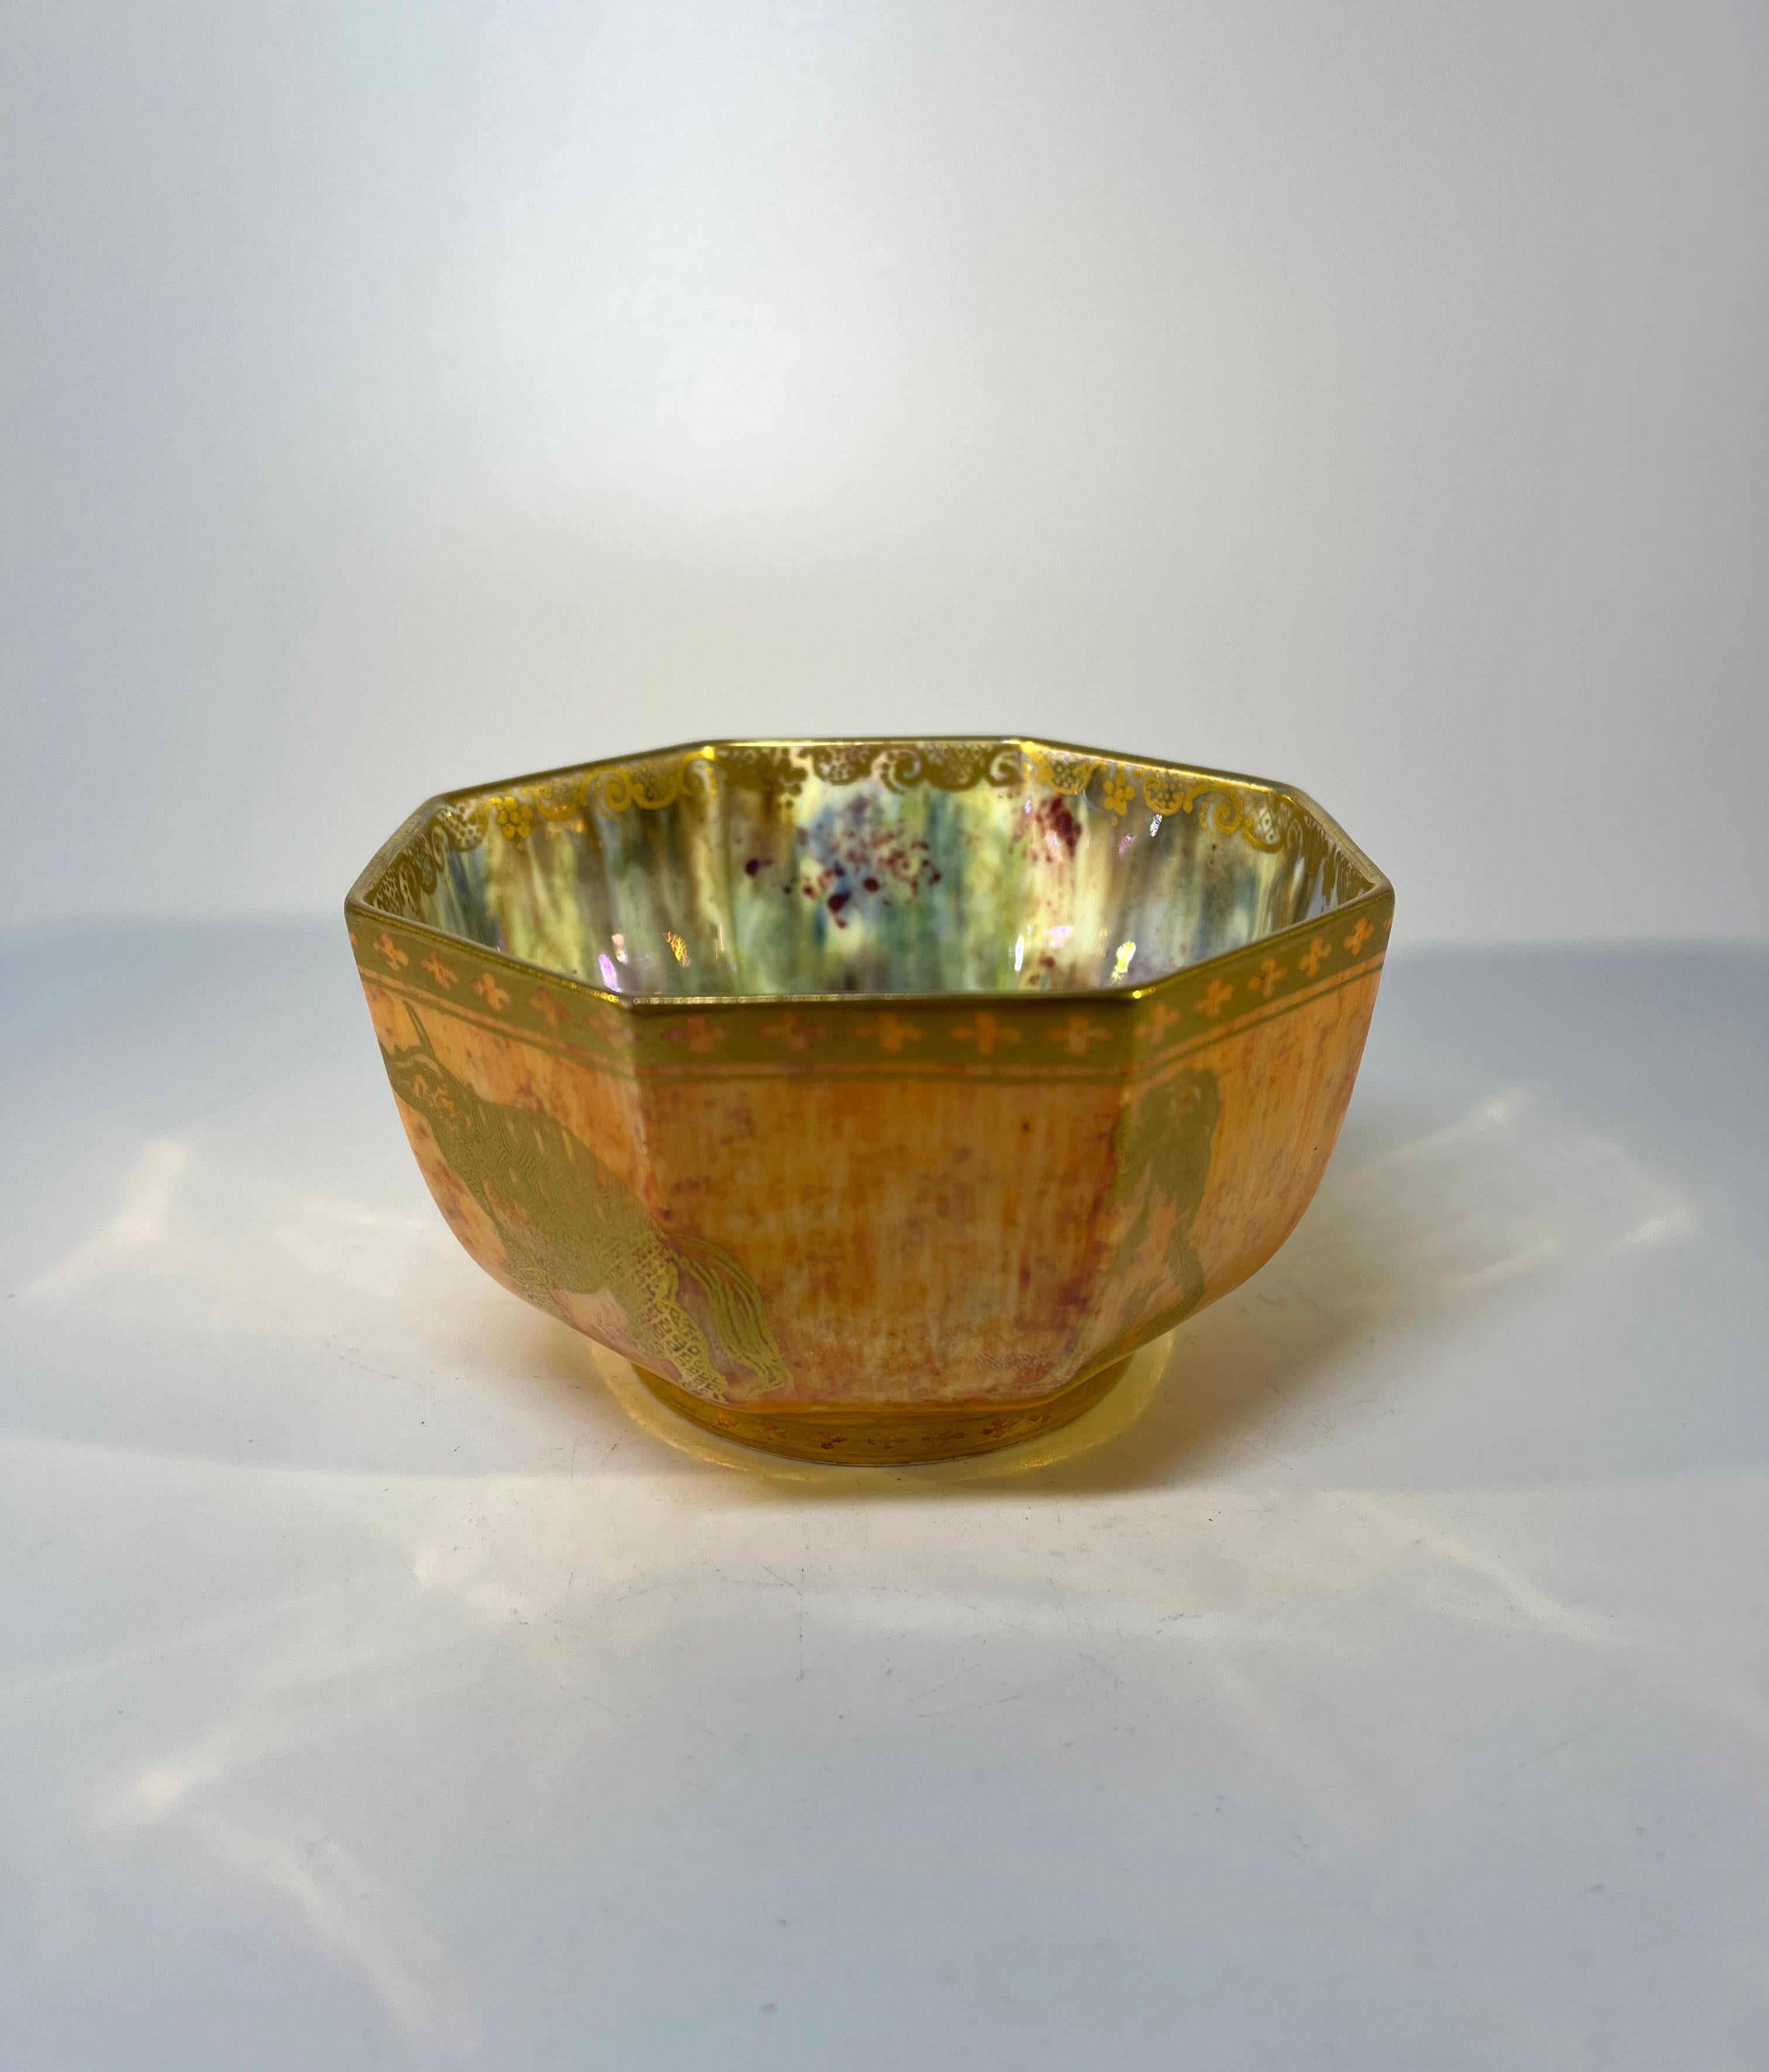 Sublime tangerine orange and gold lustre bowl by Daisy Makeig Jones for Wedgwood, England.
A fantastic menagerie of mystical creatures adorn the exterior of this exquisite piece. The interior has a ground of blue, cream and ruby mother of pearl